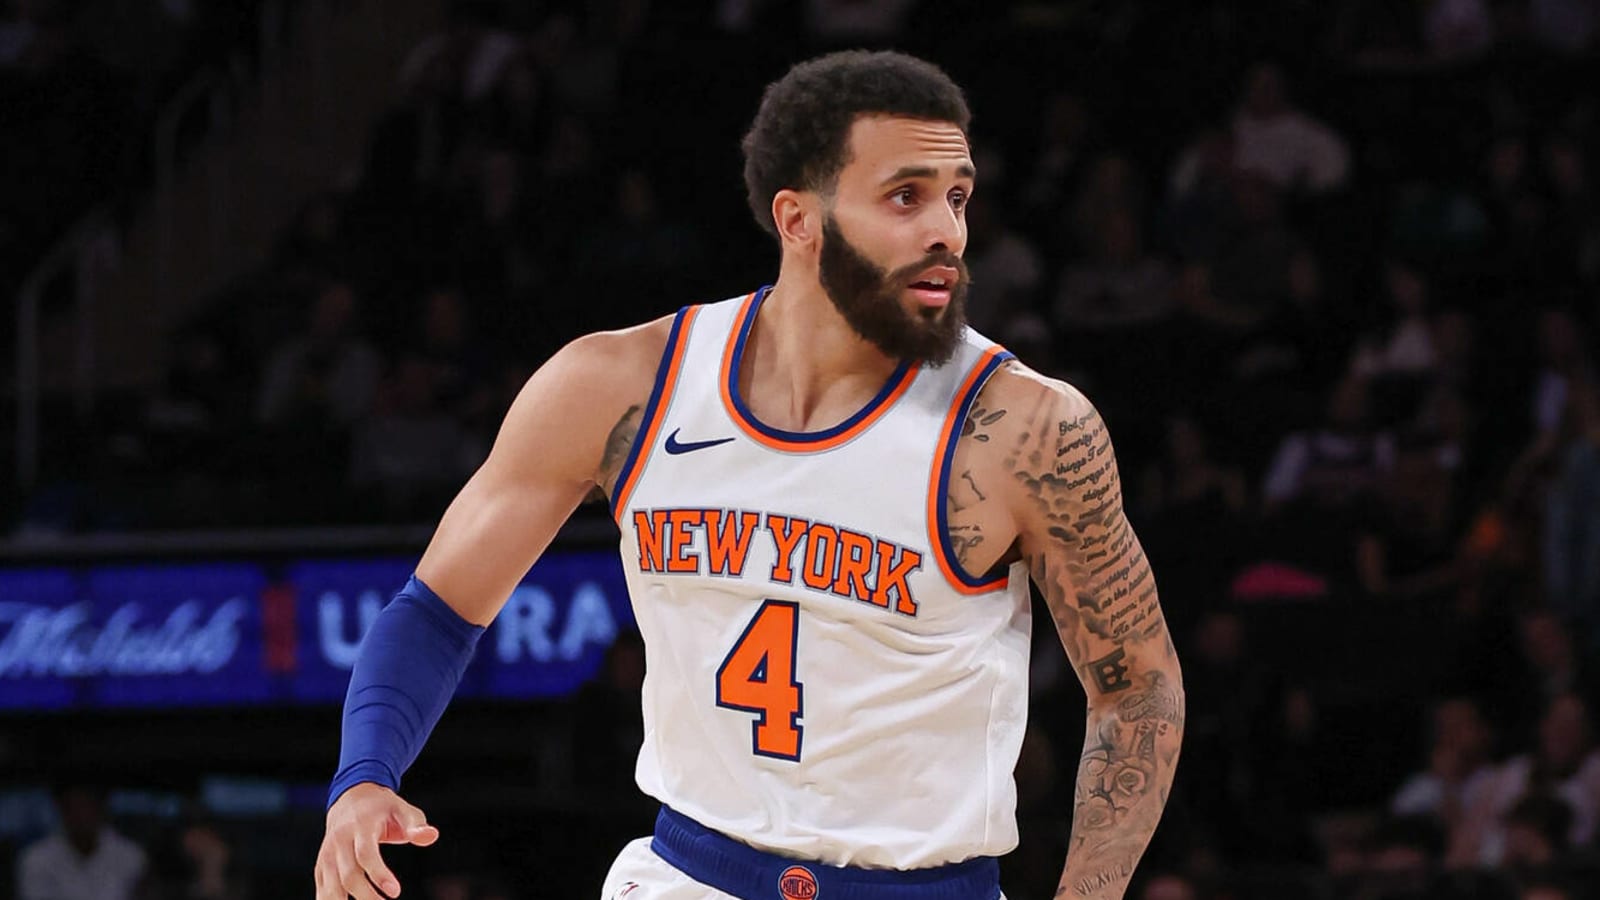 NBA Rumors: What Does the Knicks Recent Roster Moves Mean For Team and Players?